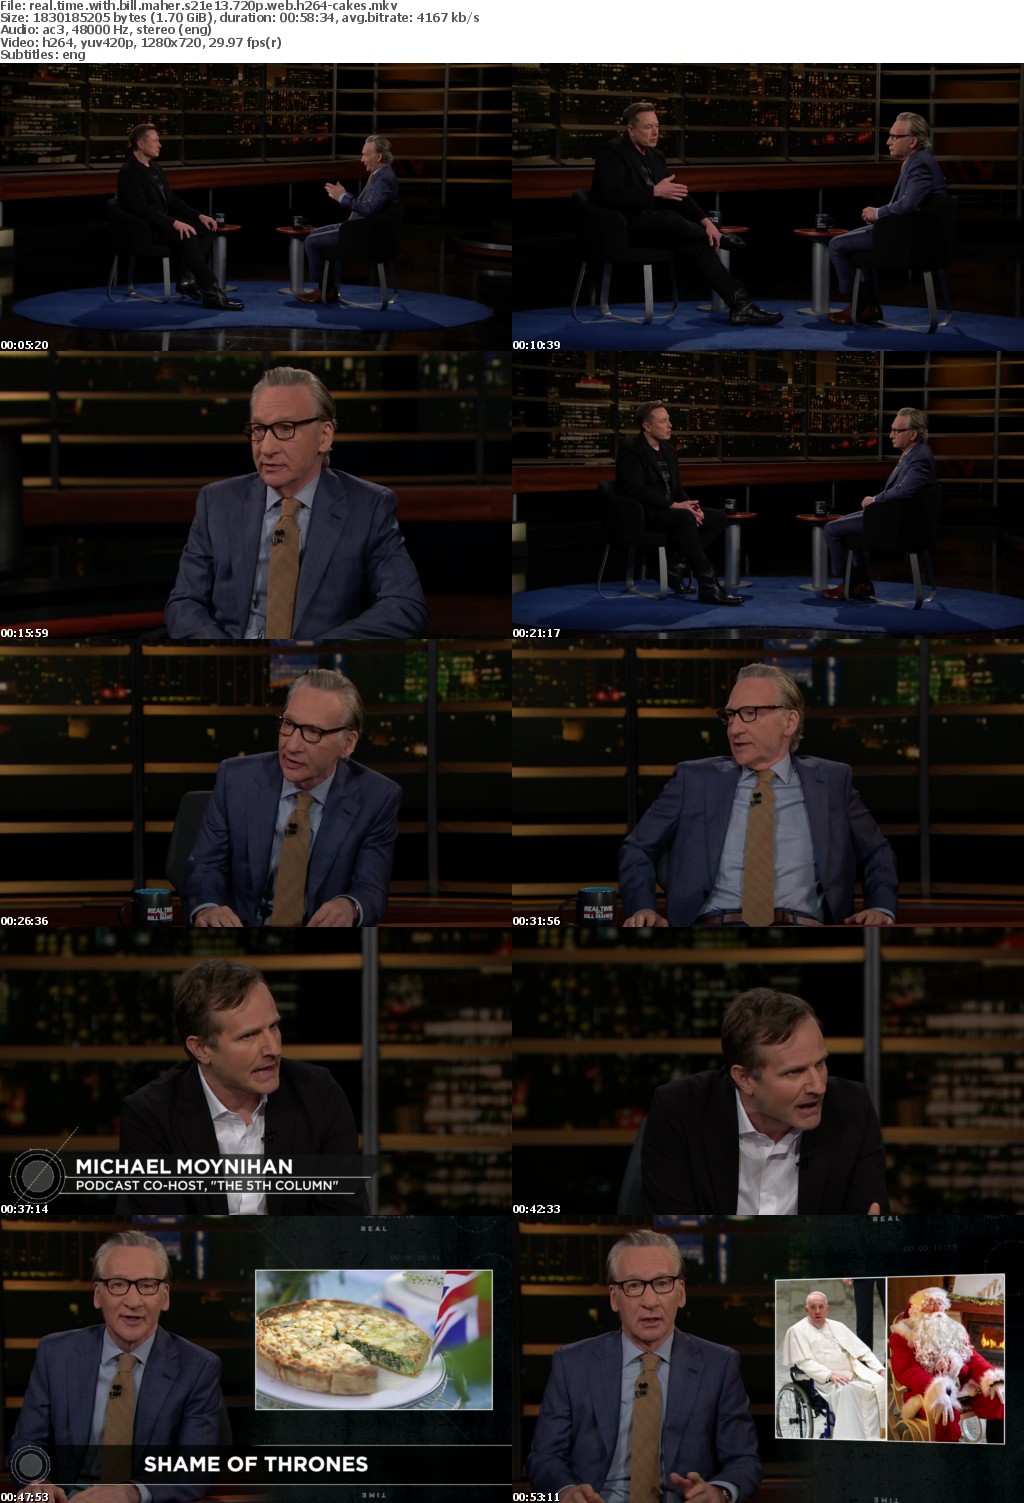 Real Time with Bill Maher S21E13 720p WEB H264-CAKES